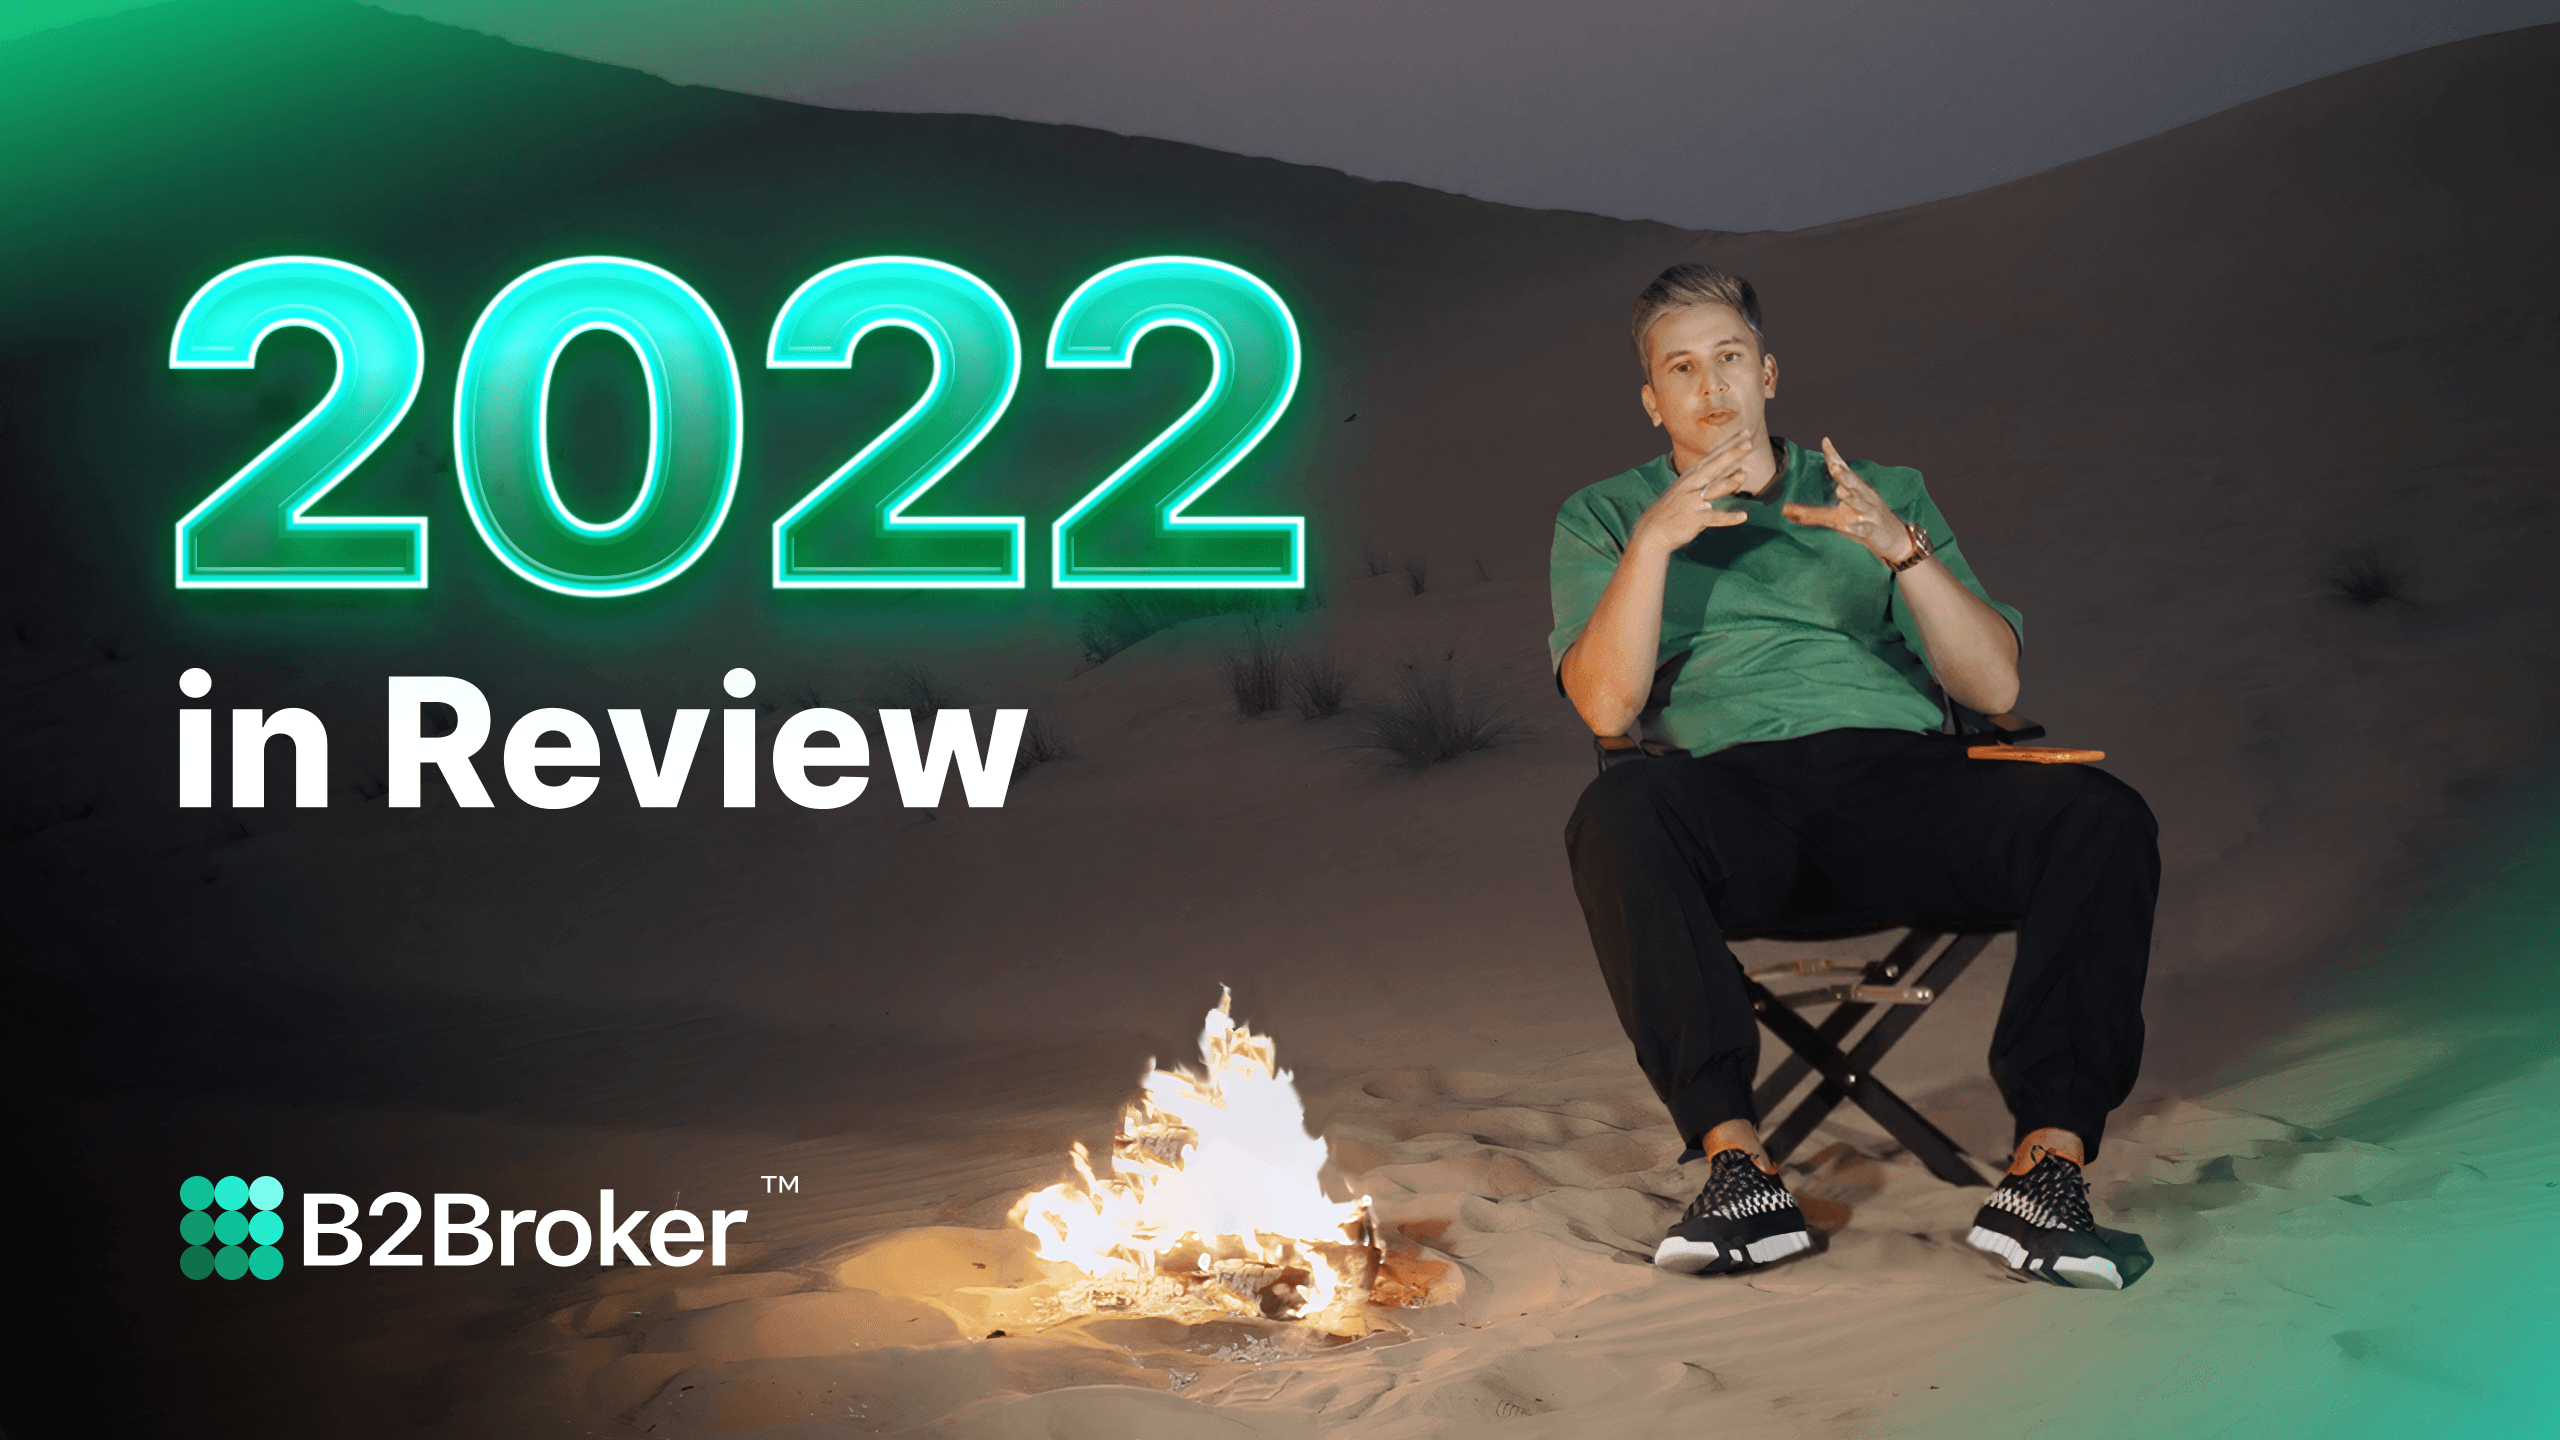 B2Broker Results | Company Year in Review 2022